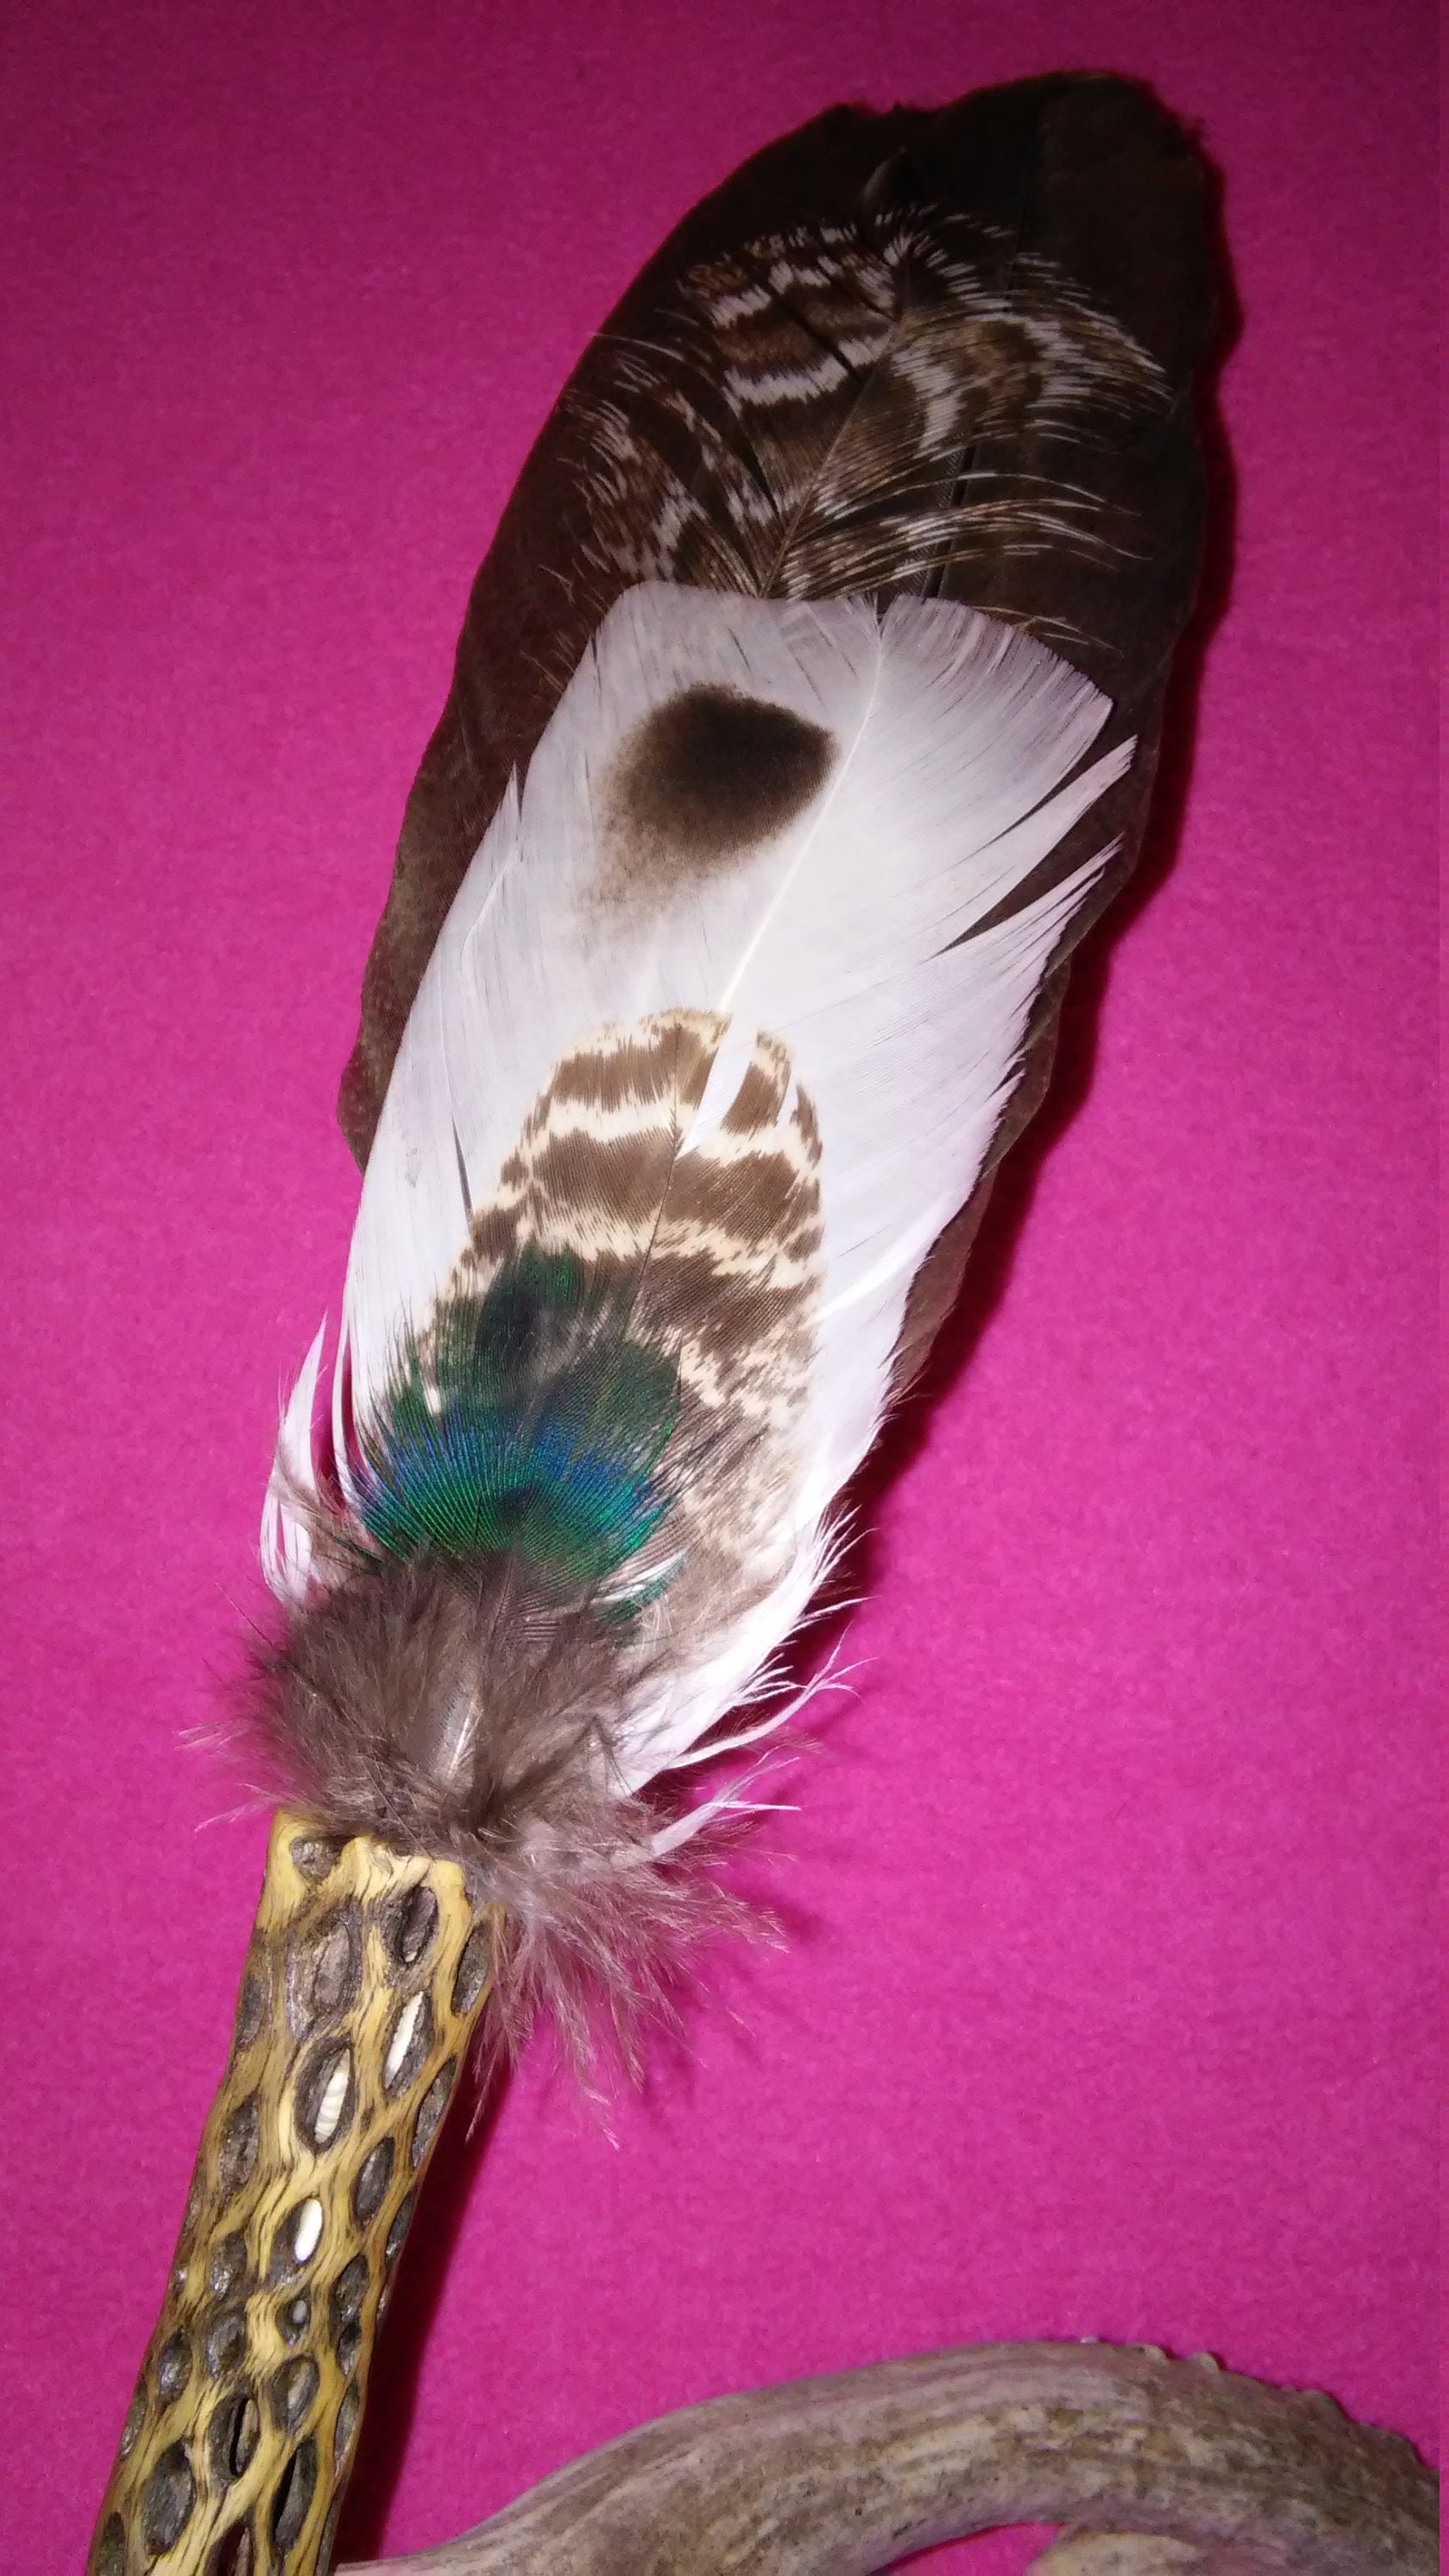 Hand-Crafted Feather Cowboy Hat Hatband - 'Rooster